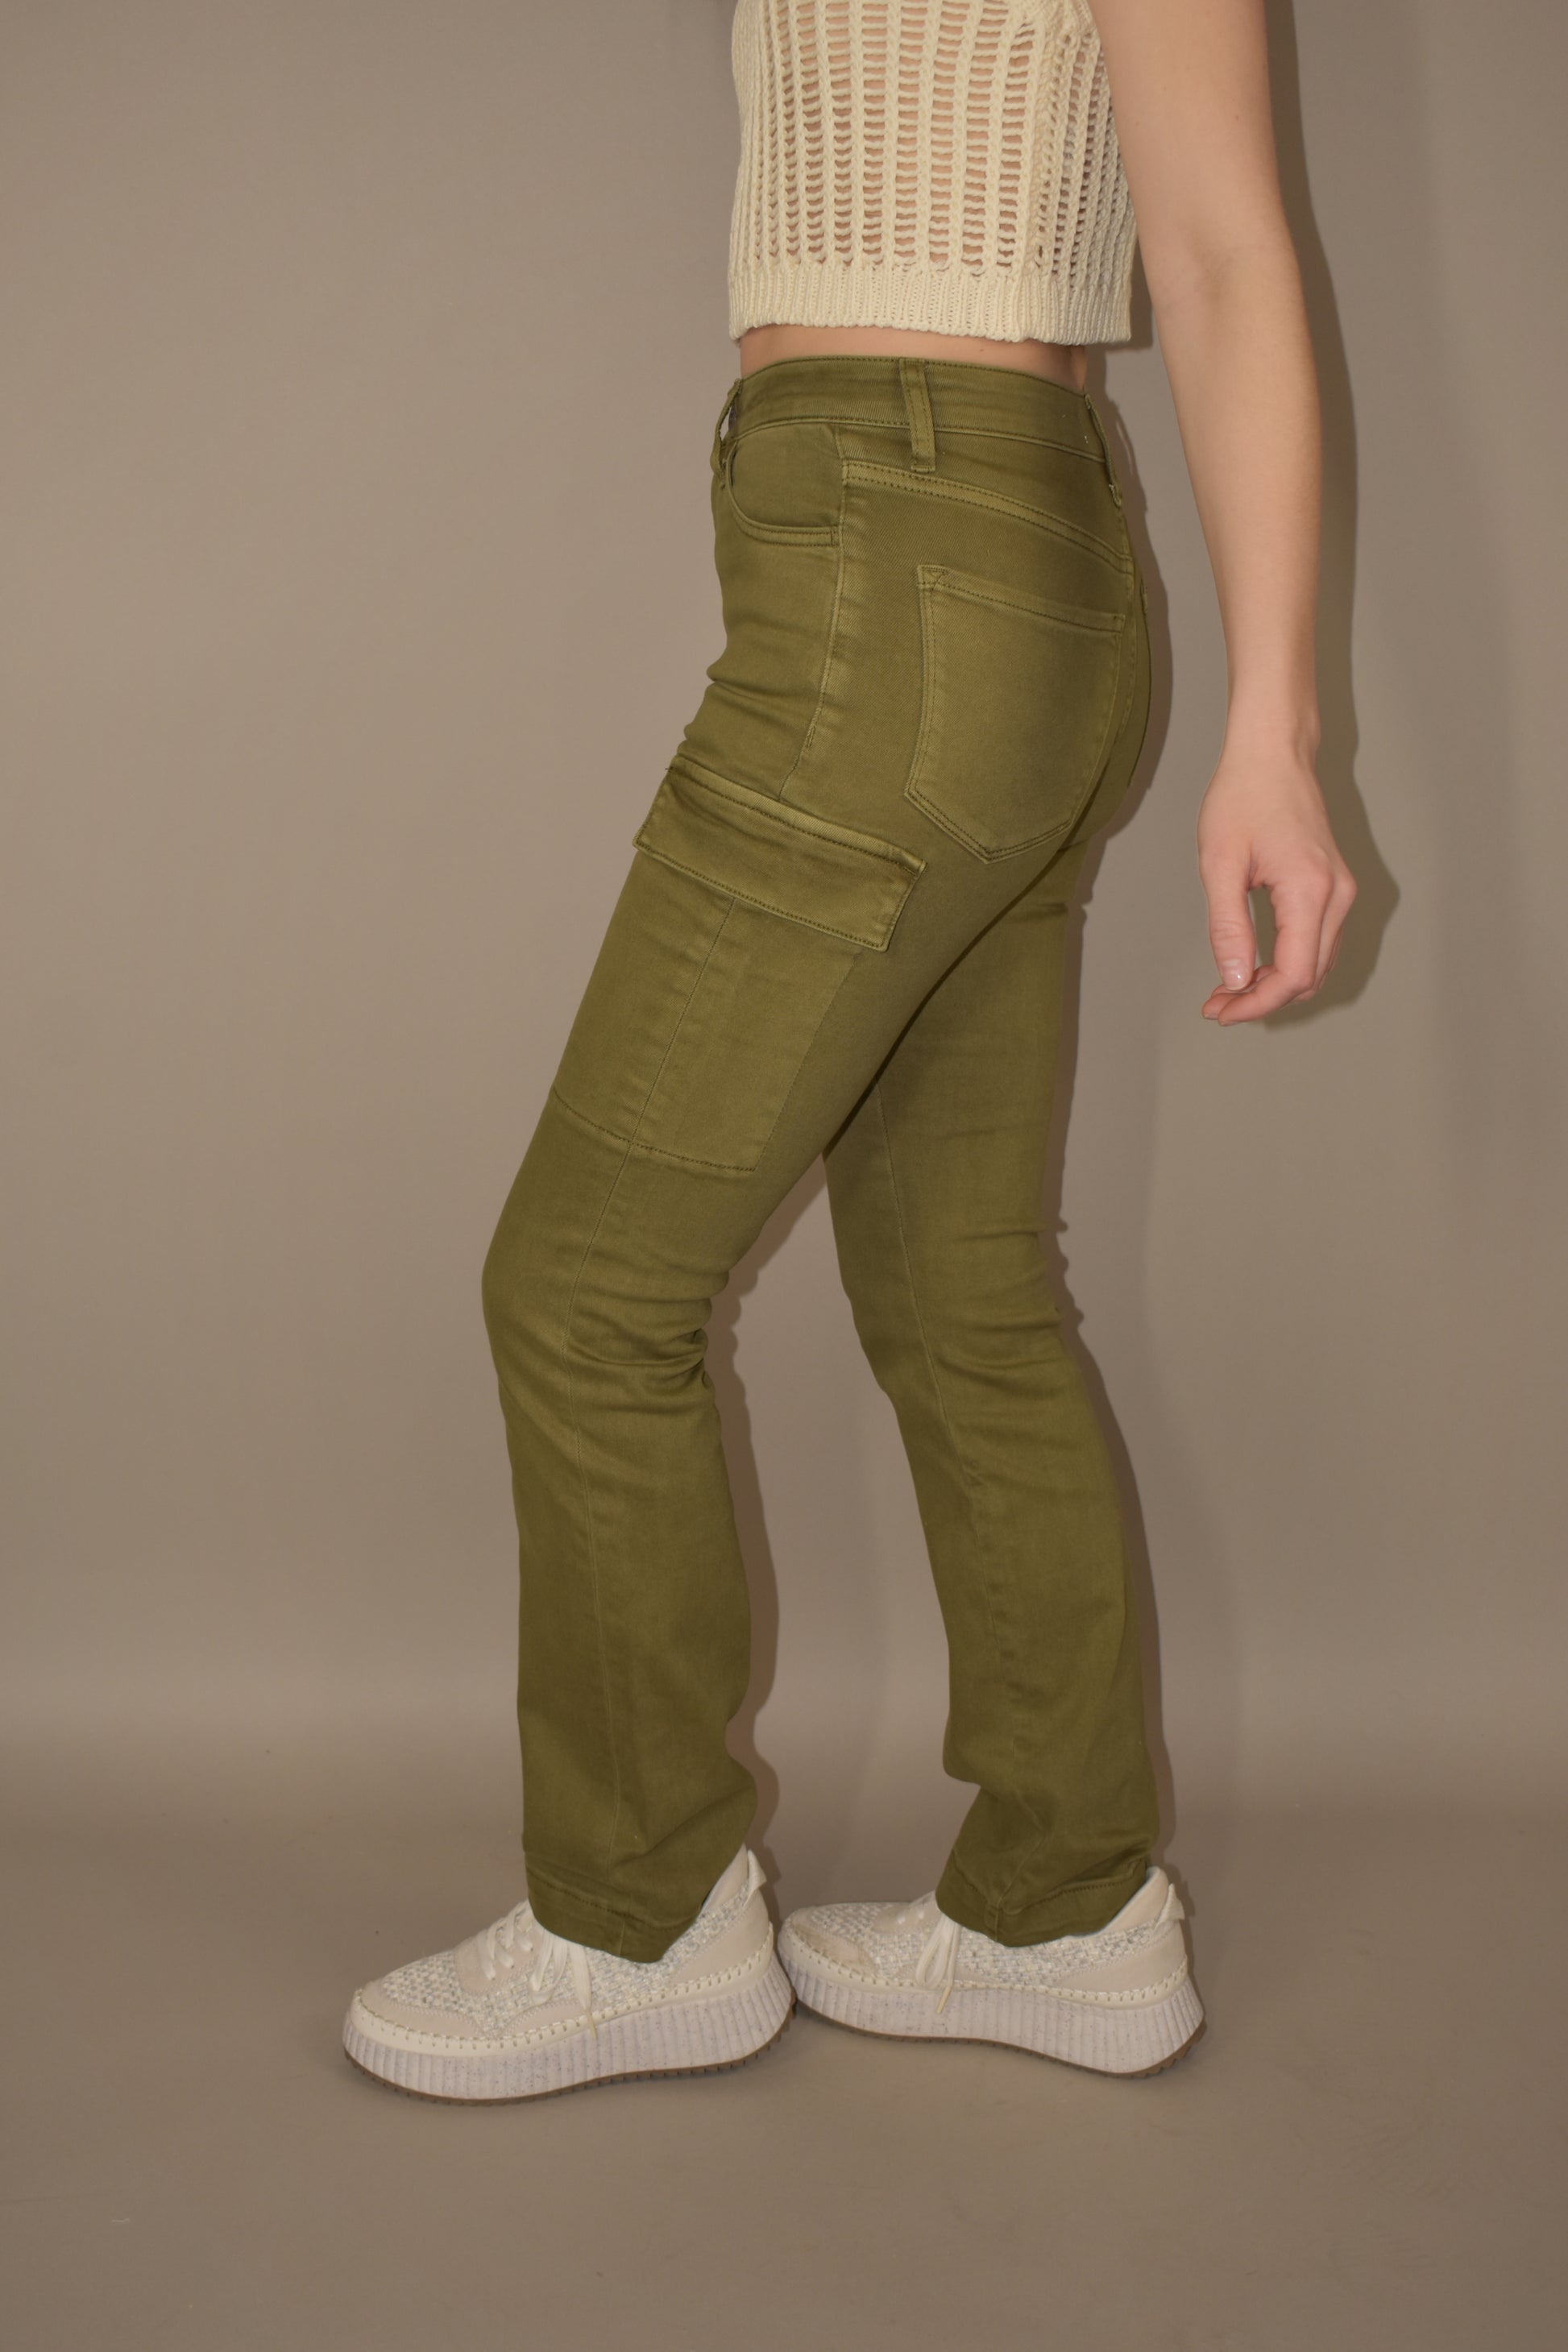 straight legged olive colored stretch denim with side cargo pockets flap enclosure front and back pockets no holes